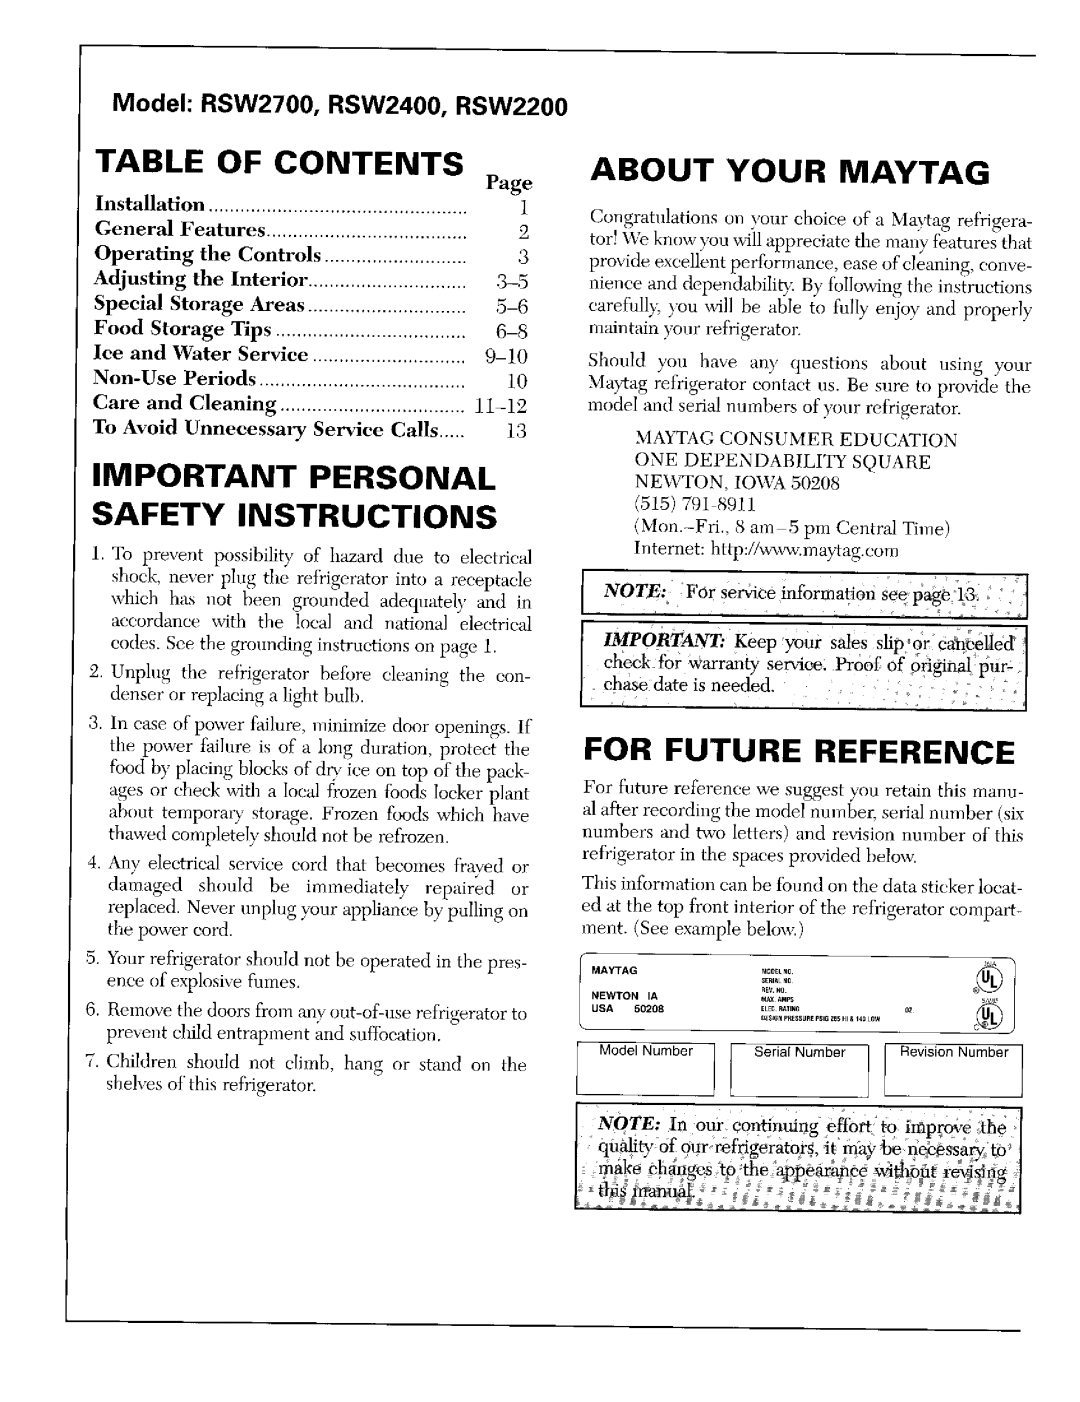 Maytag warranty Model: RSW2700, RSW2400, RSW2200, Table Of Contents, About Your Maytag, 79is lJ, uArraG 